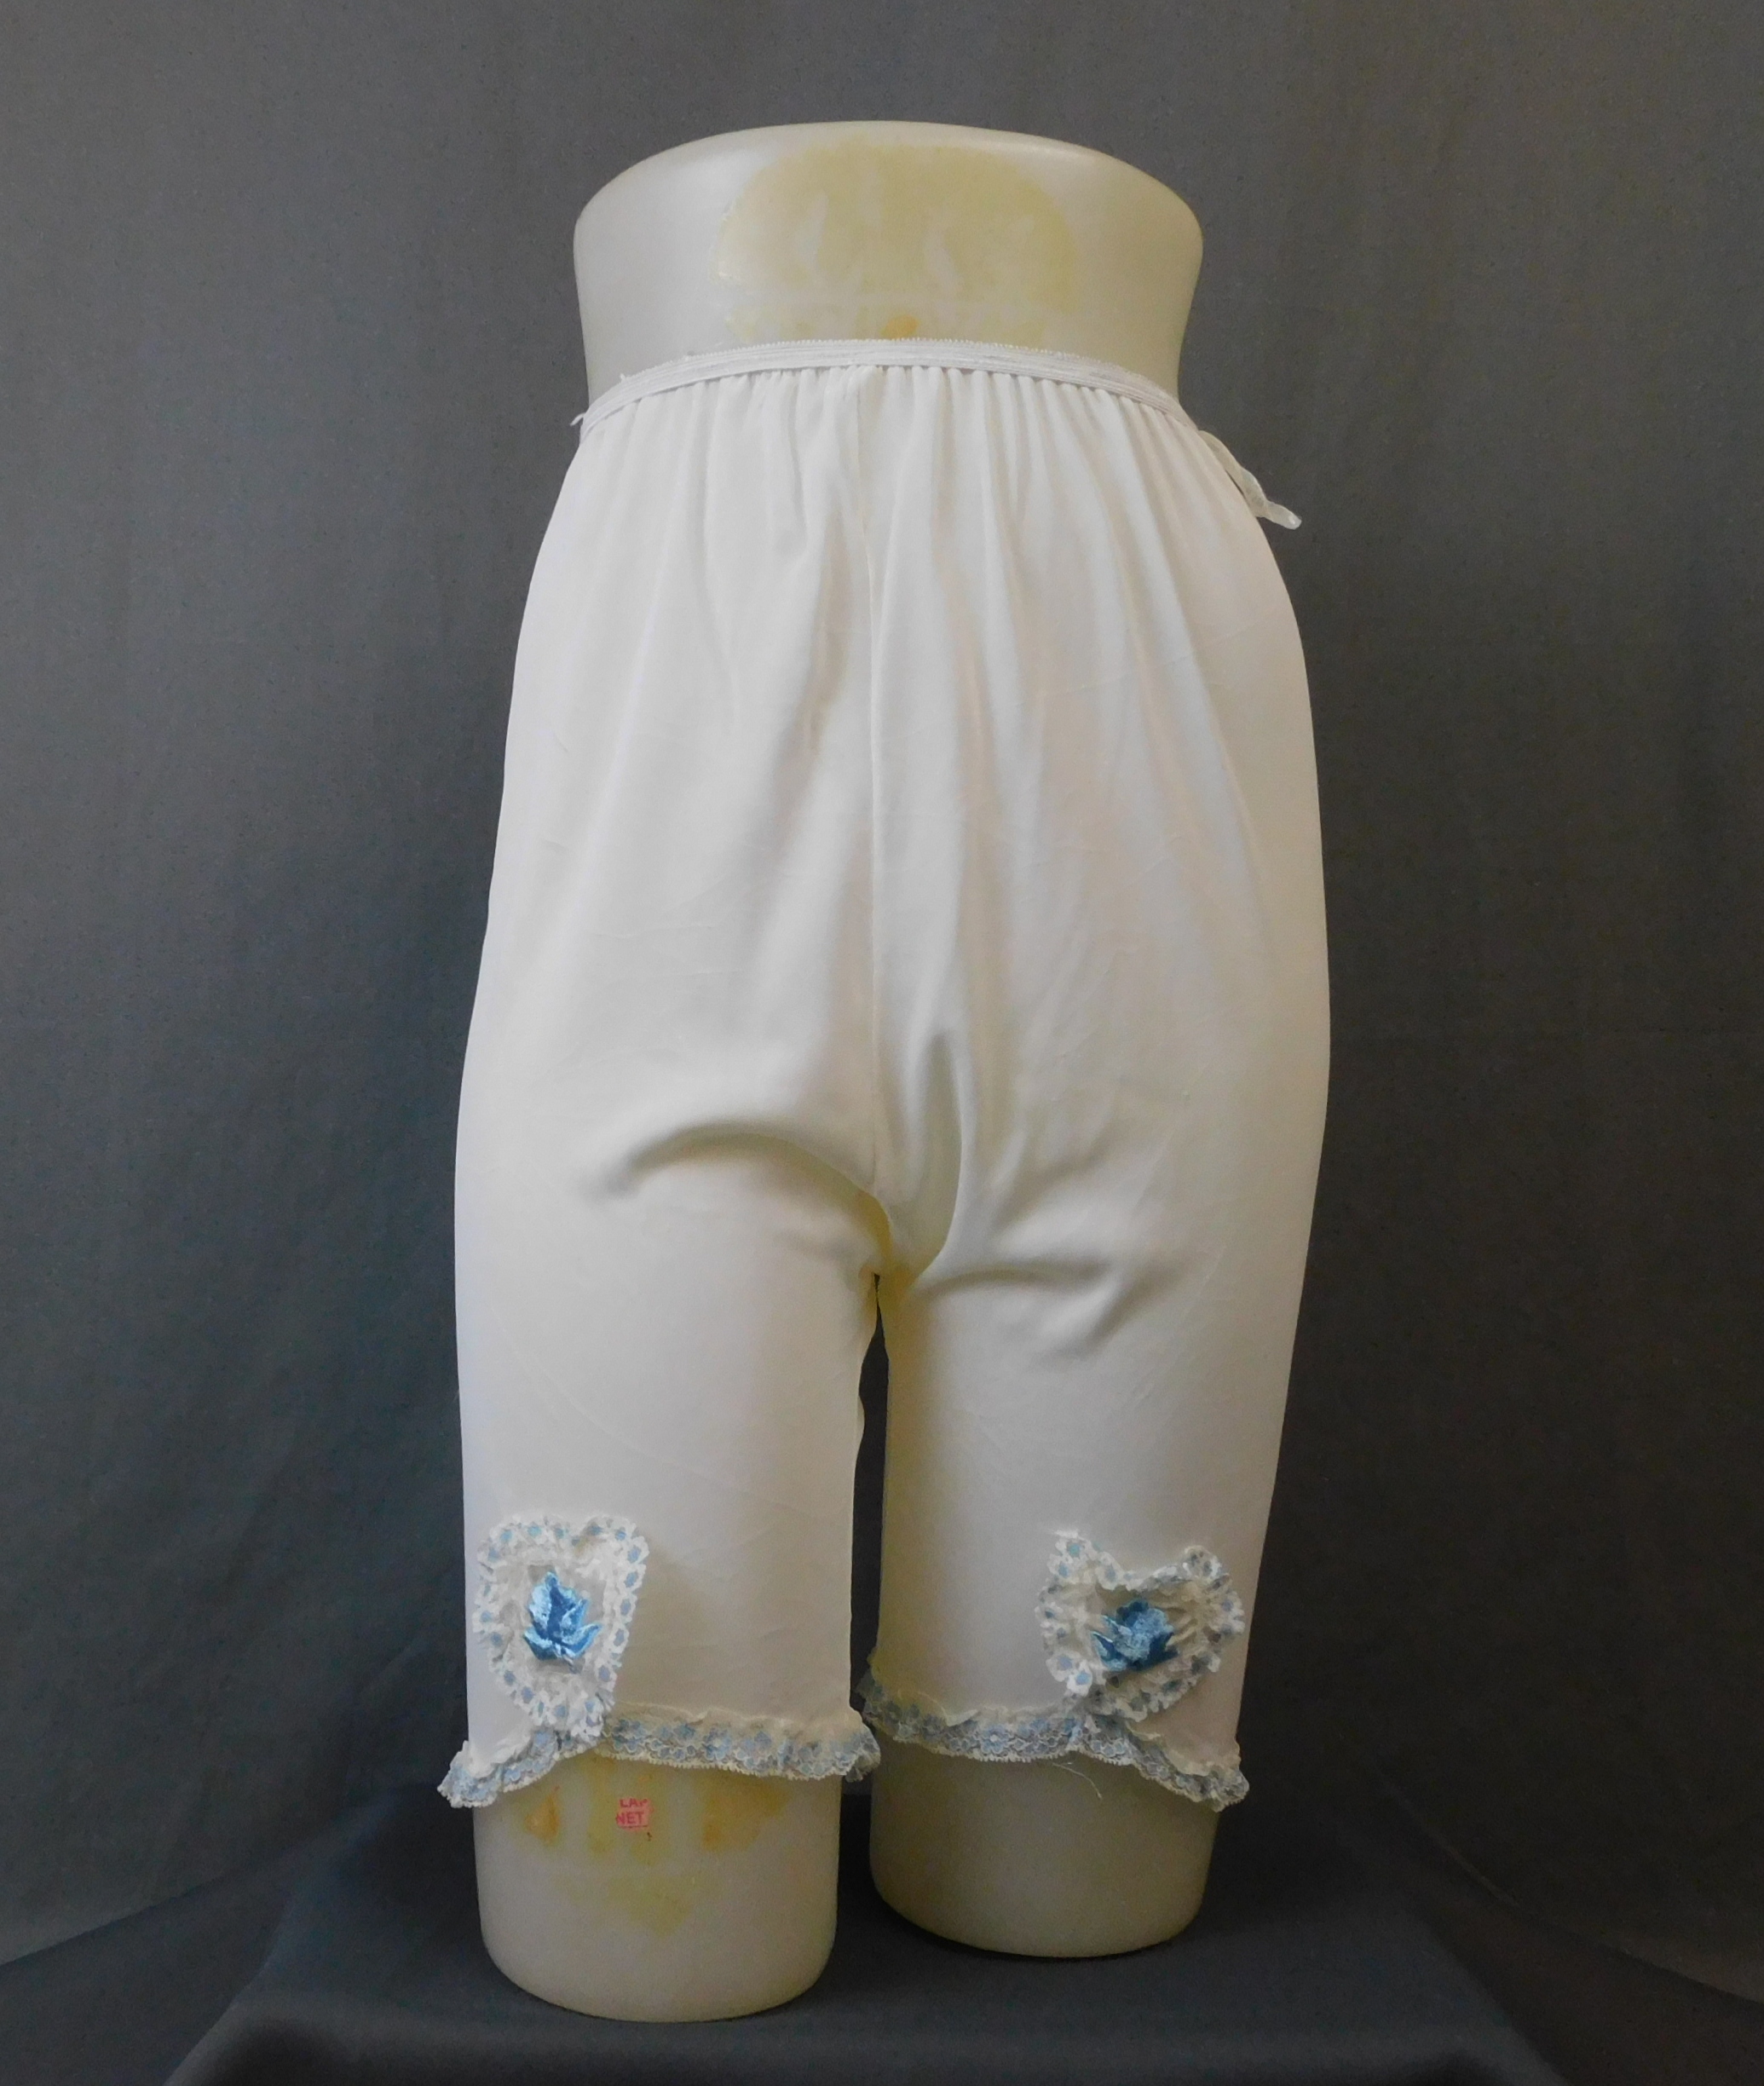 Vintage White Pettipants Panties with Blue Lace, Acetate size 7, 1960s